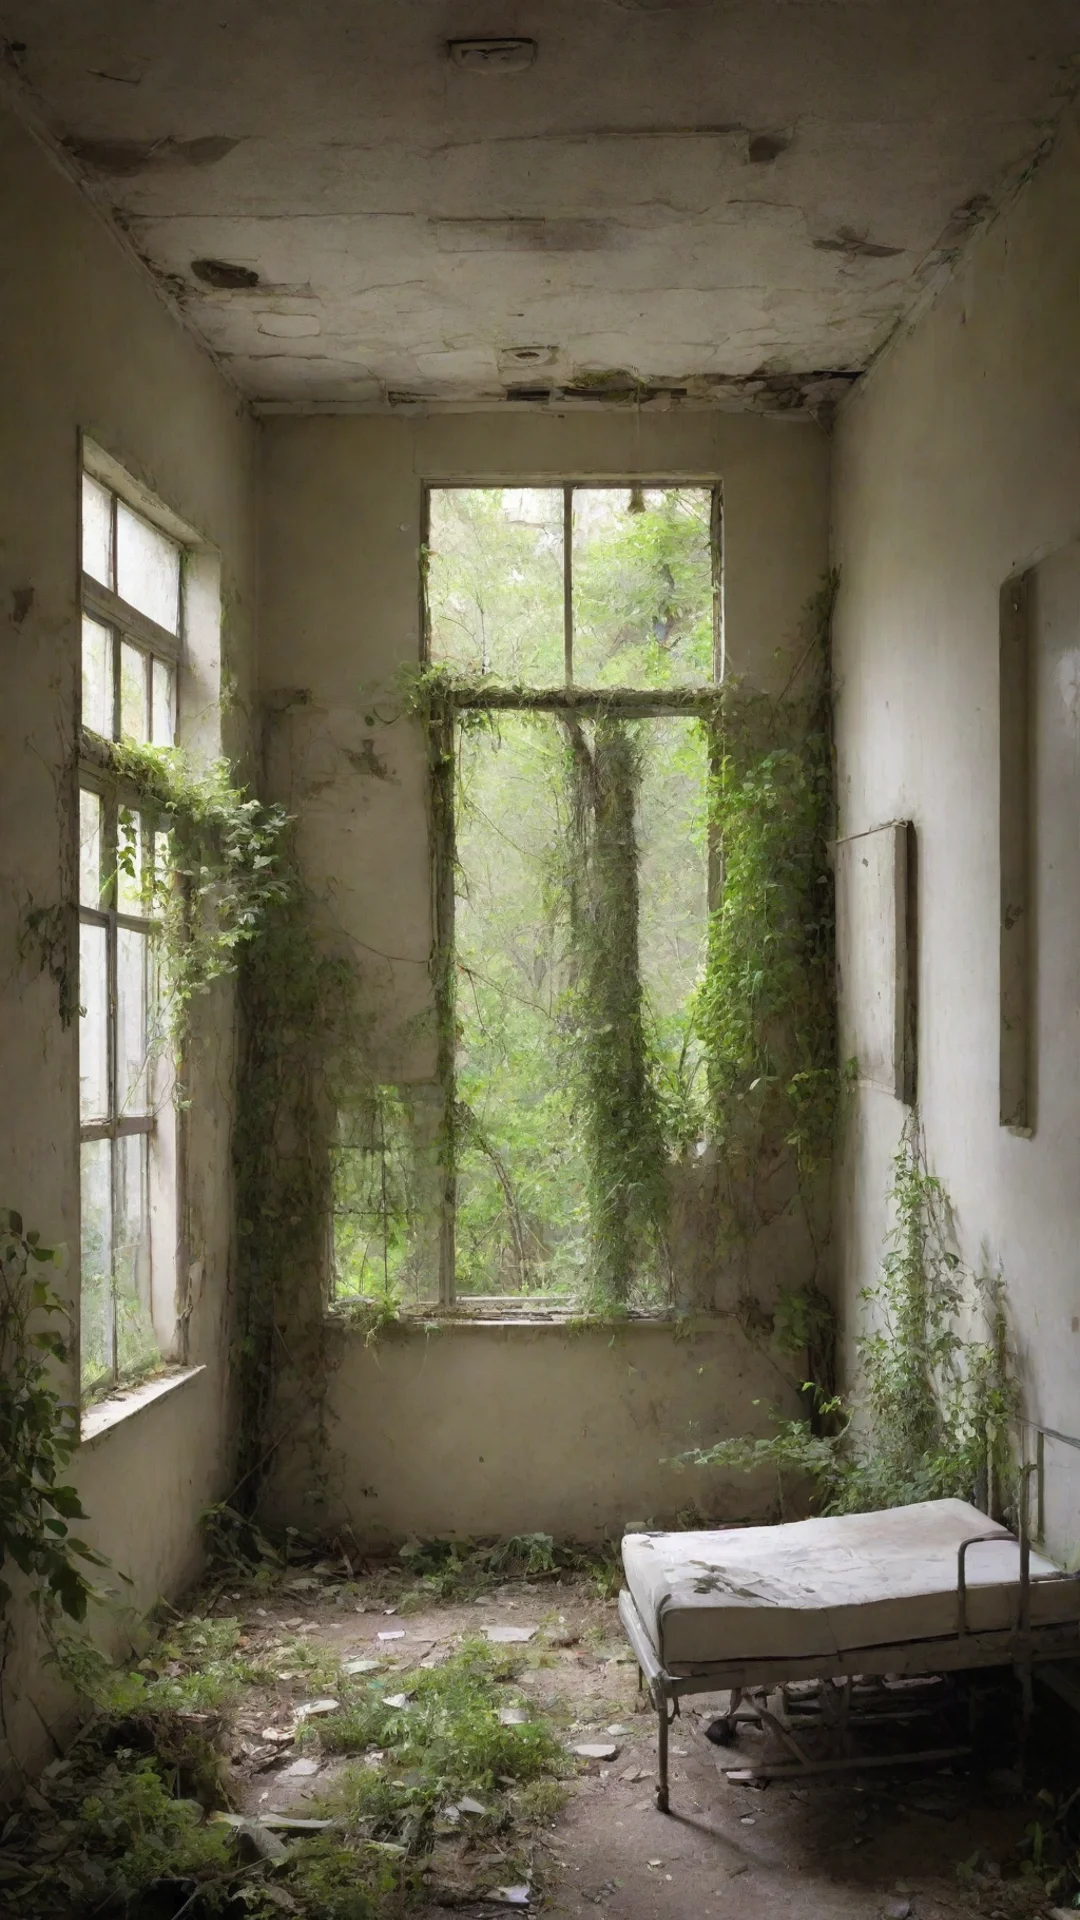 aiabandoned hospital room with vegetation overgrowing tall